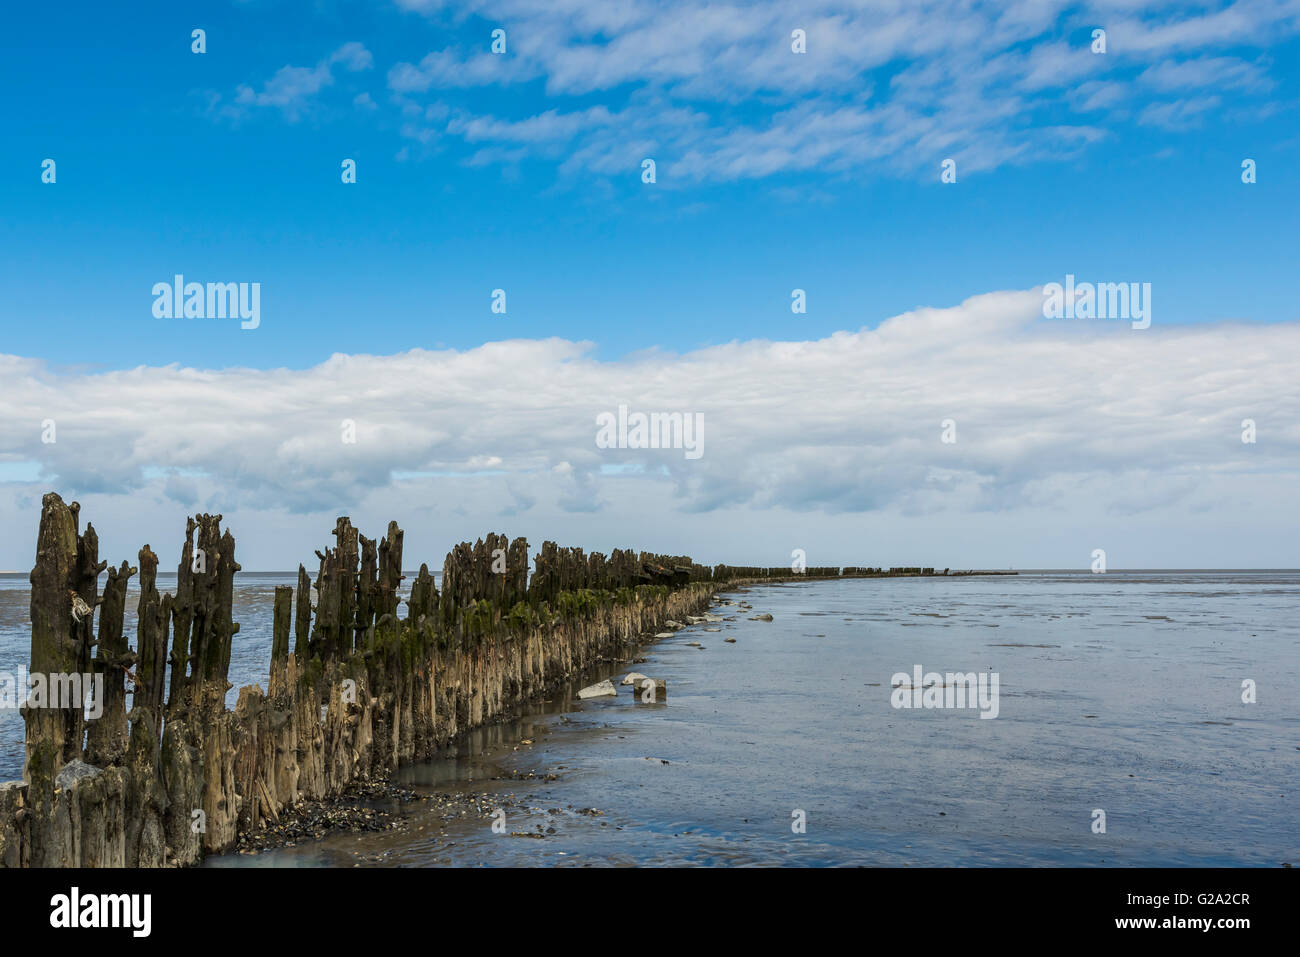 Coastline of the Waddensea at Friesland with mud flats and protection poles and dikes. Stock Photo